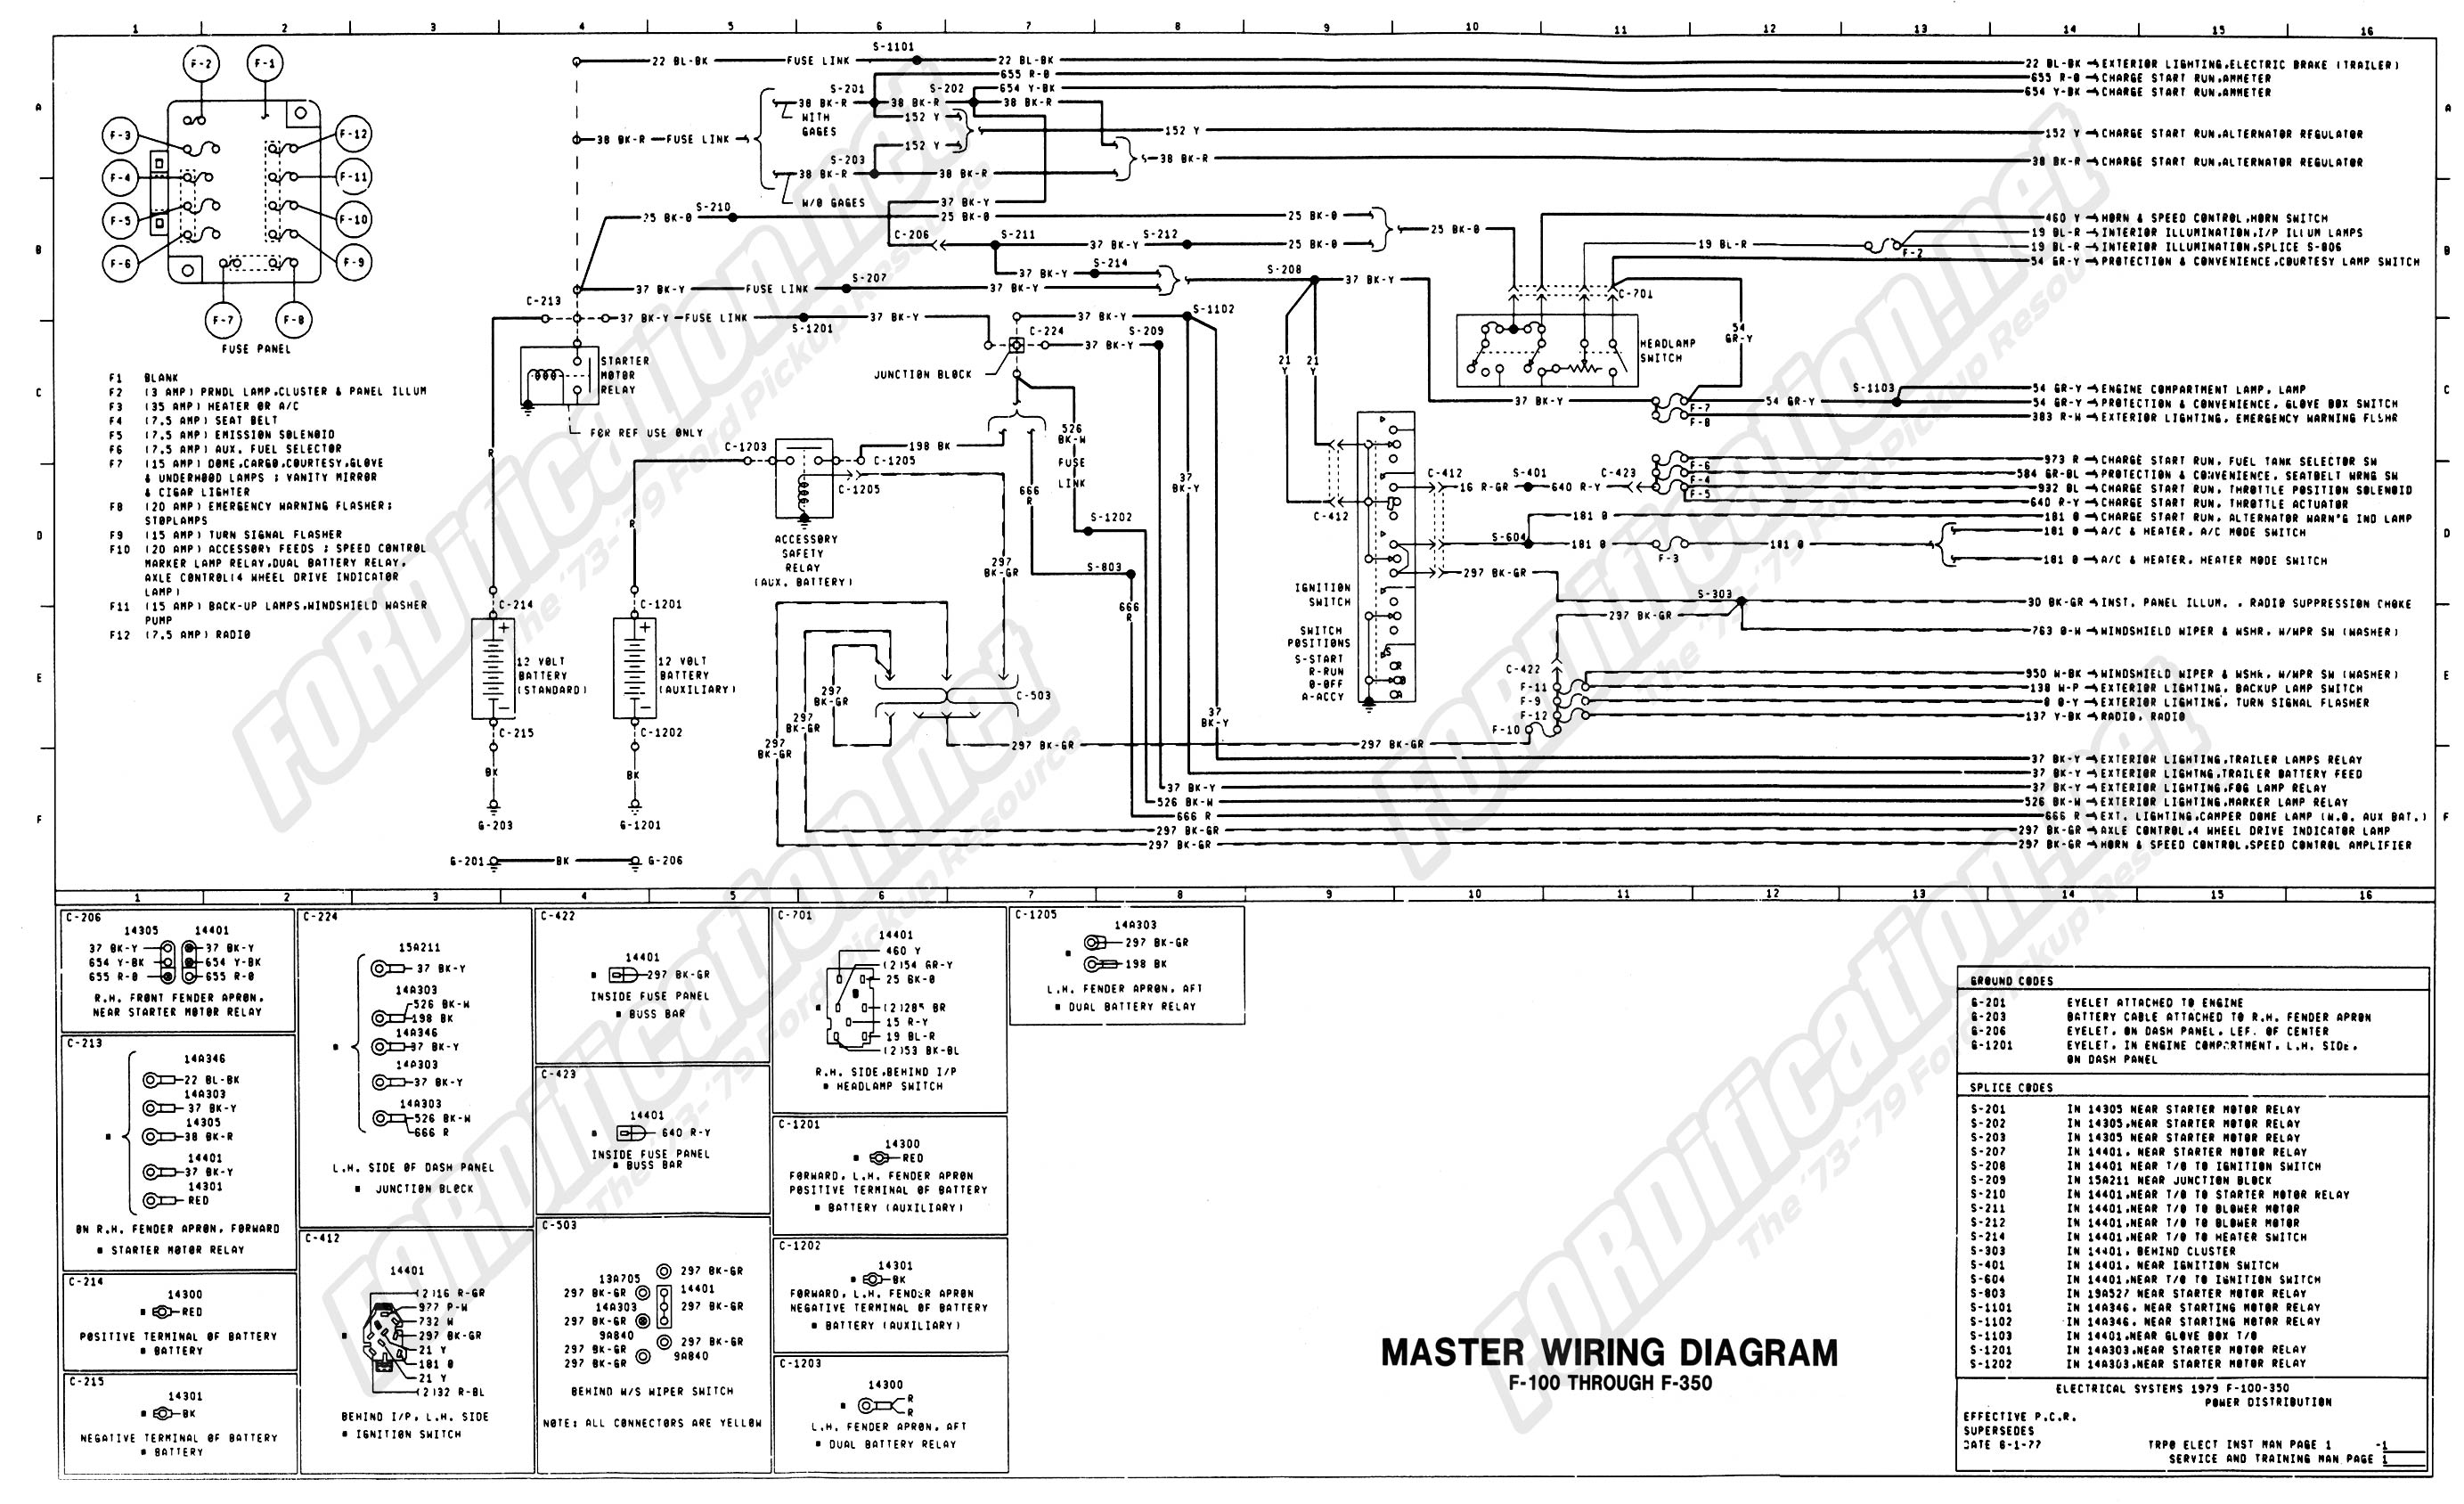 Wiring diagrams for 1979 ford truck